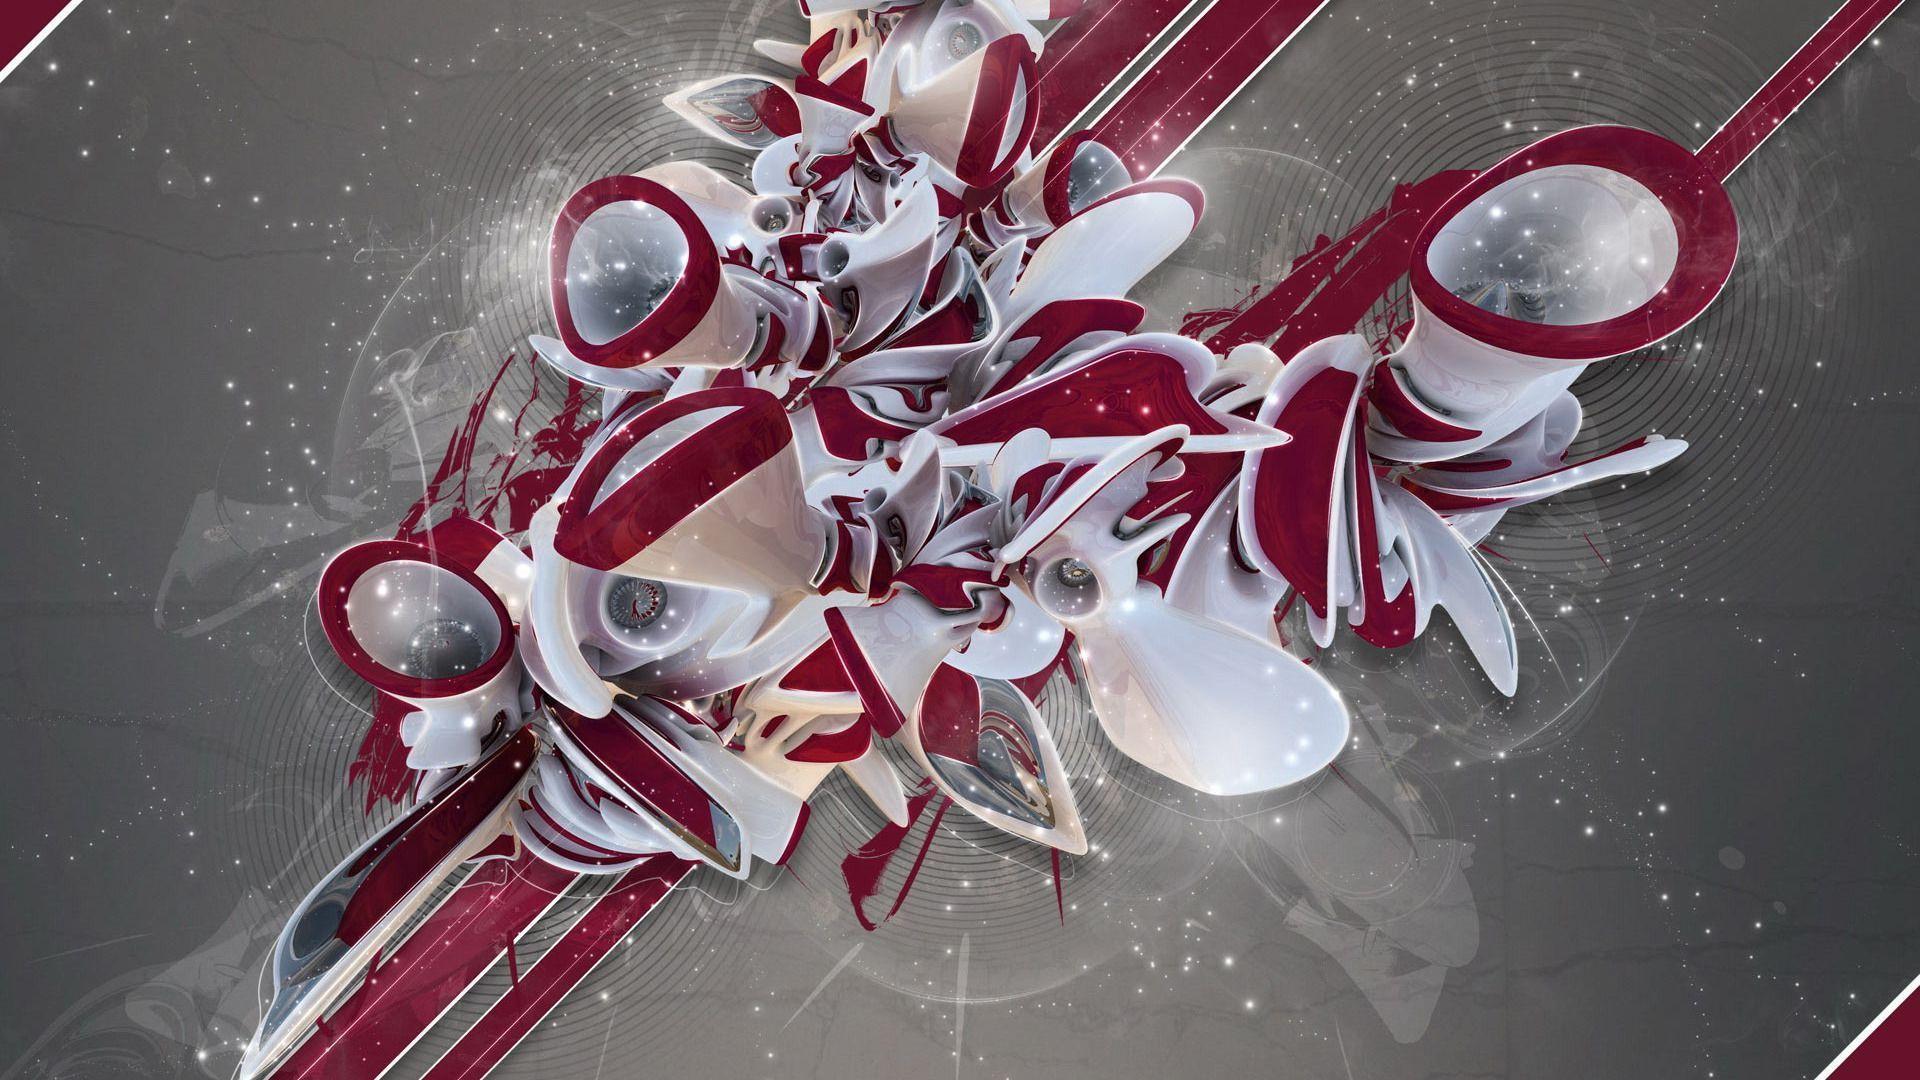 Red and white graffiti shapes 1920x1200 3D Wallpaper - #